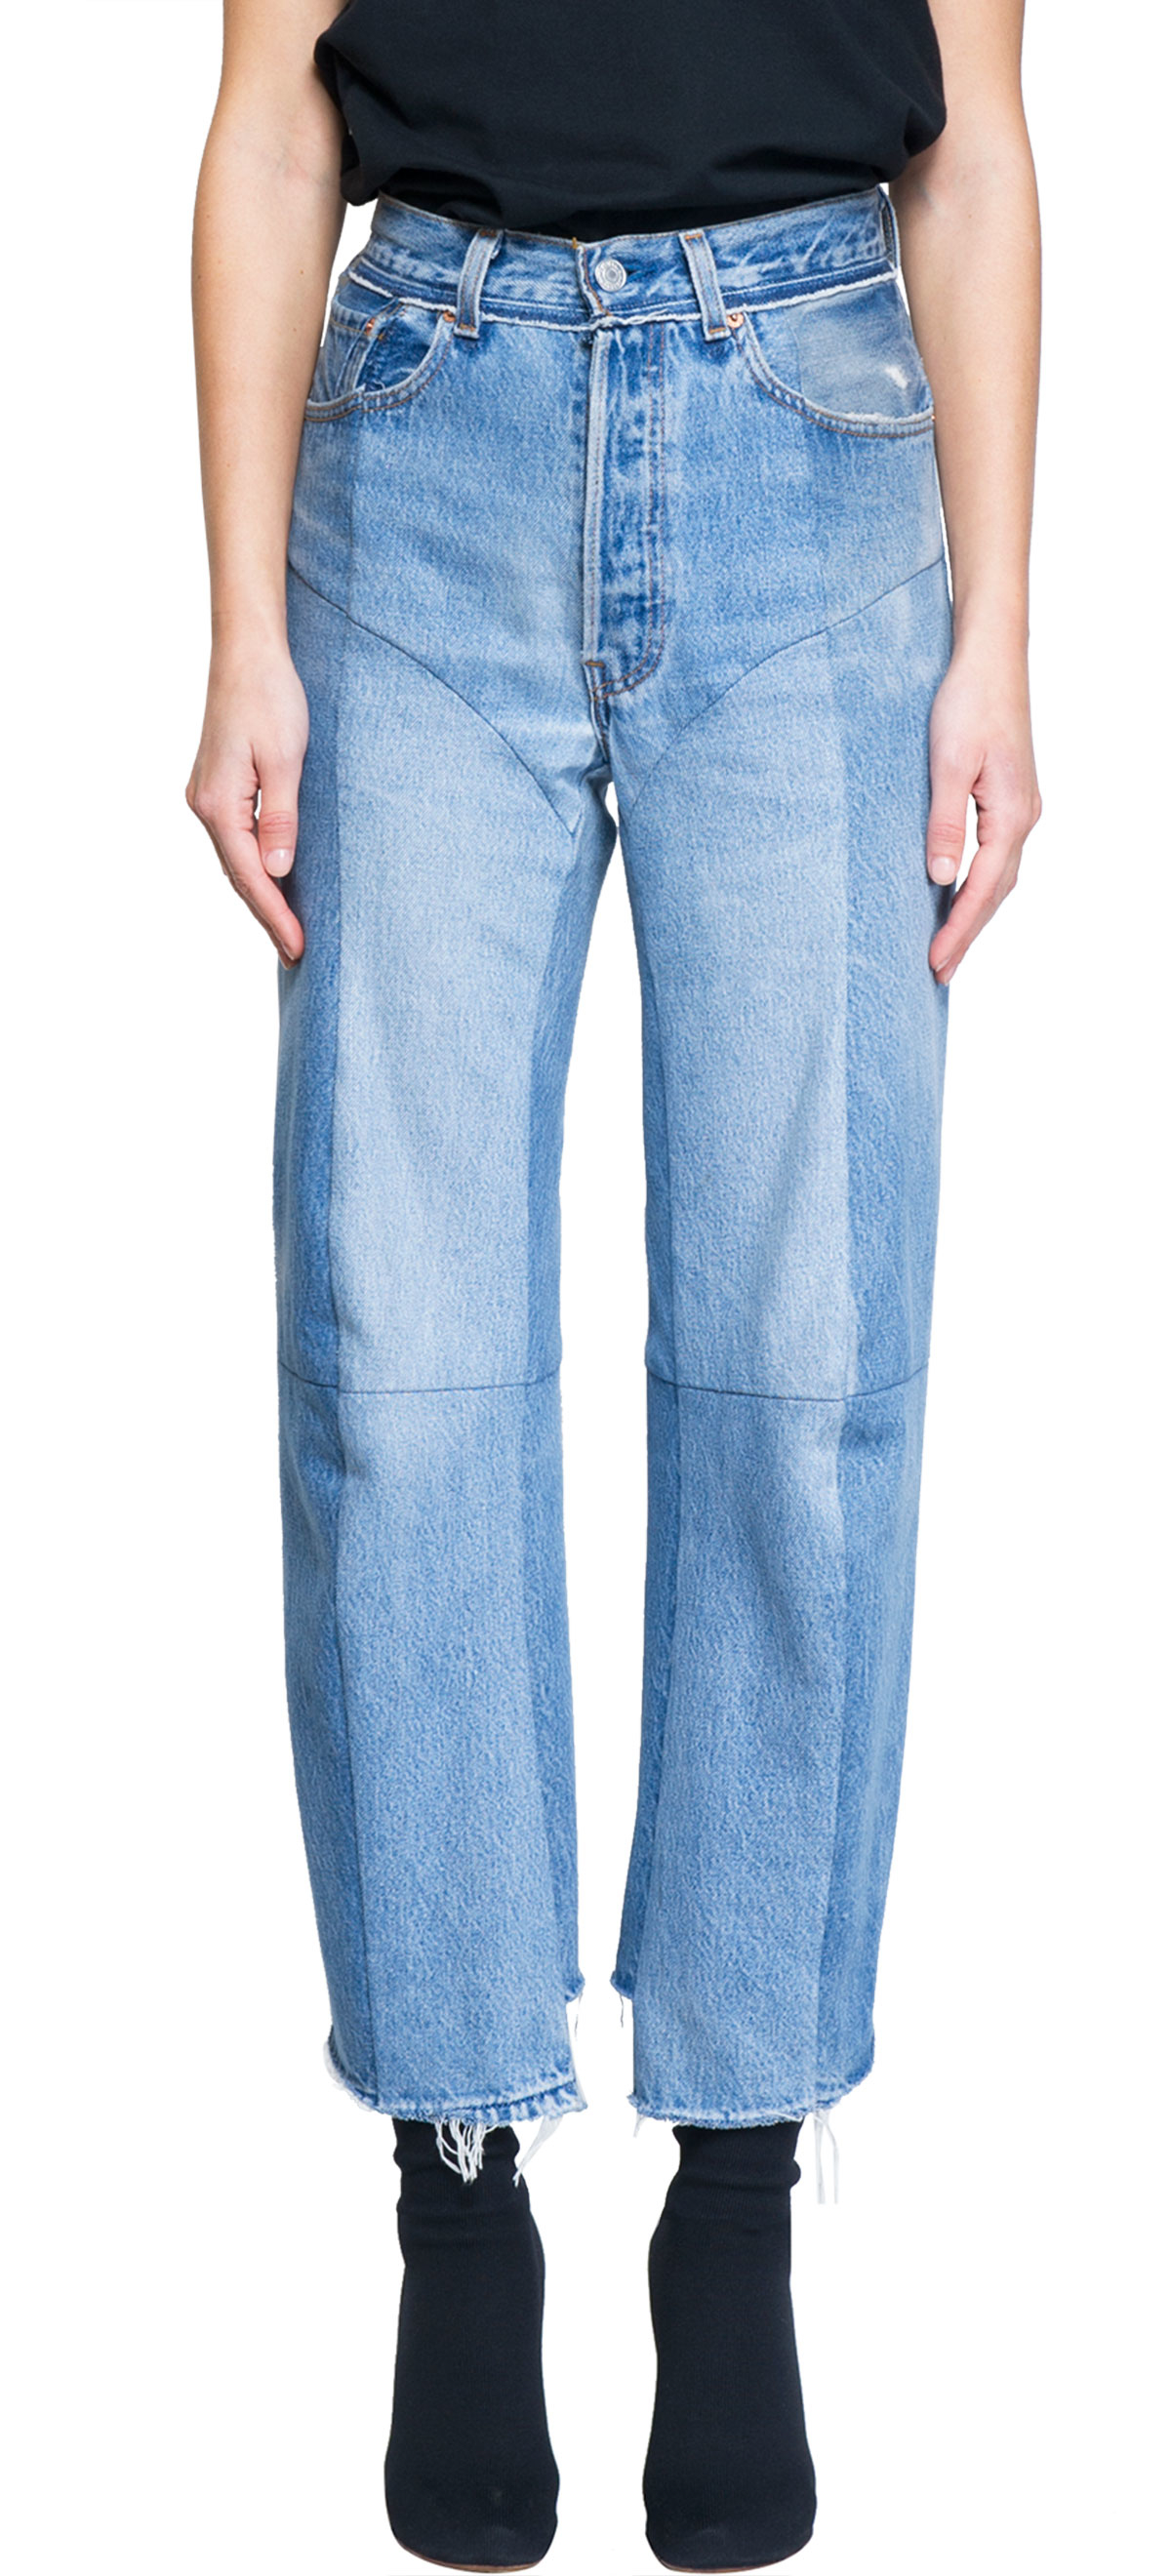 Vetements Paneled High-Waisted Straight-Leg Jeans in Blue - Lyst